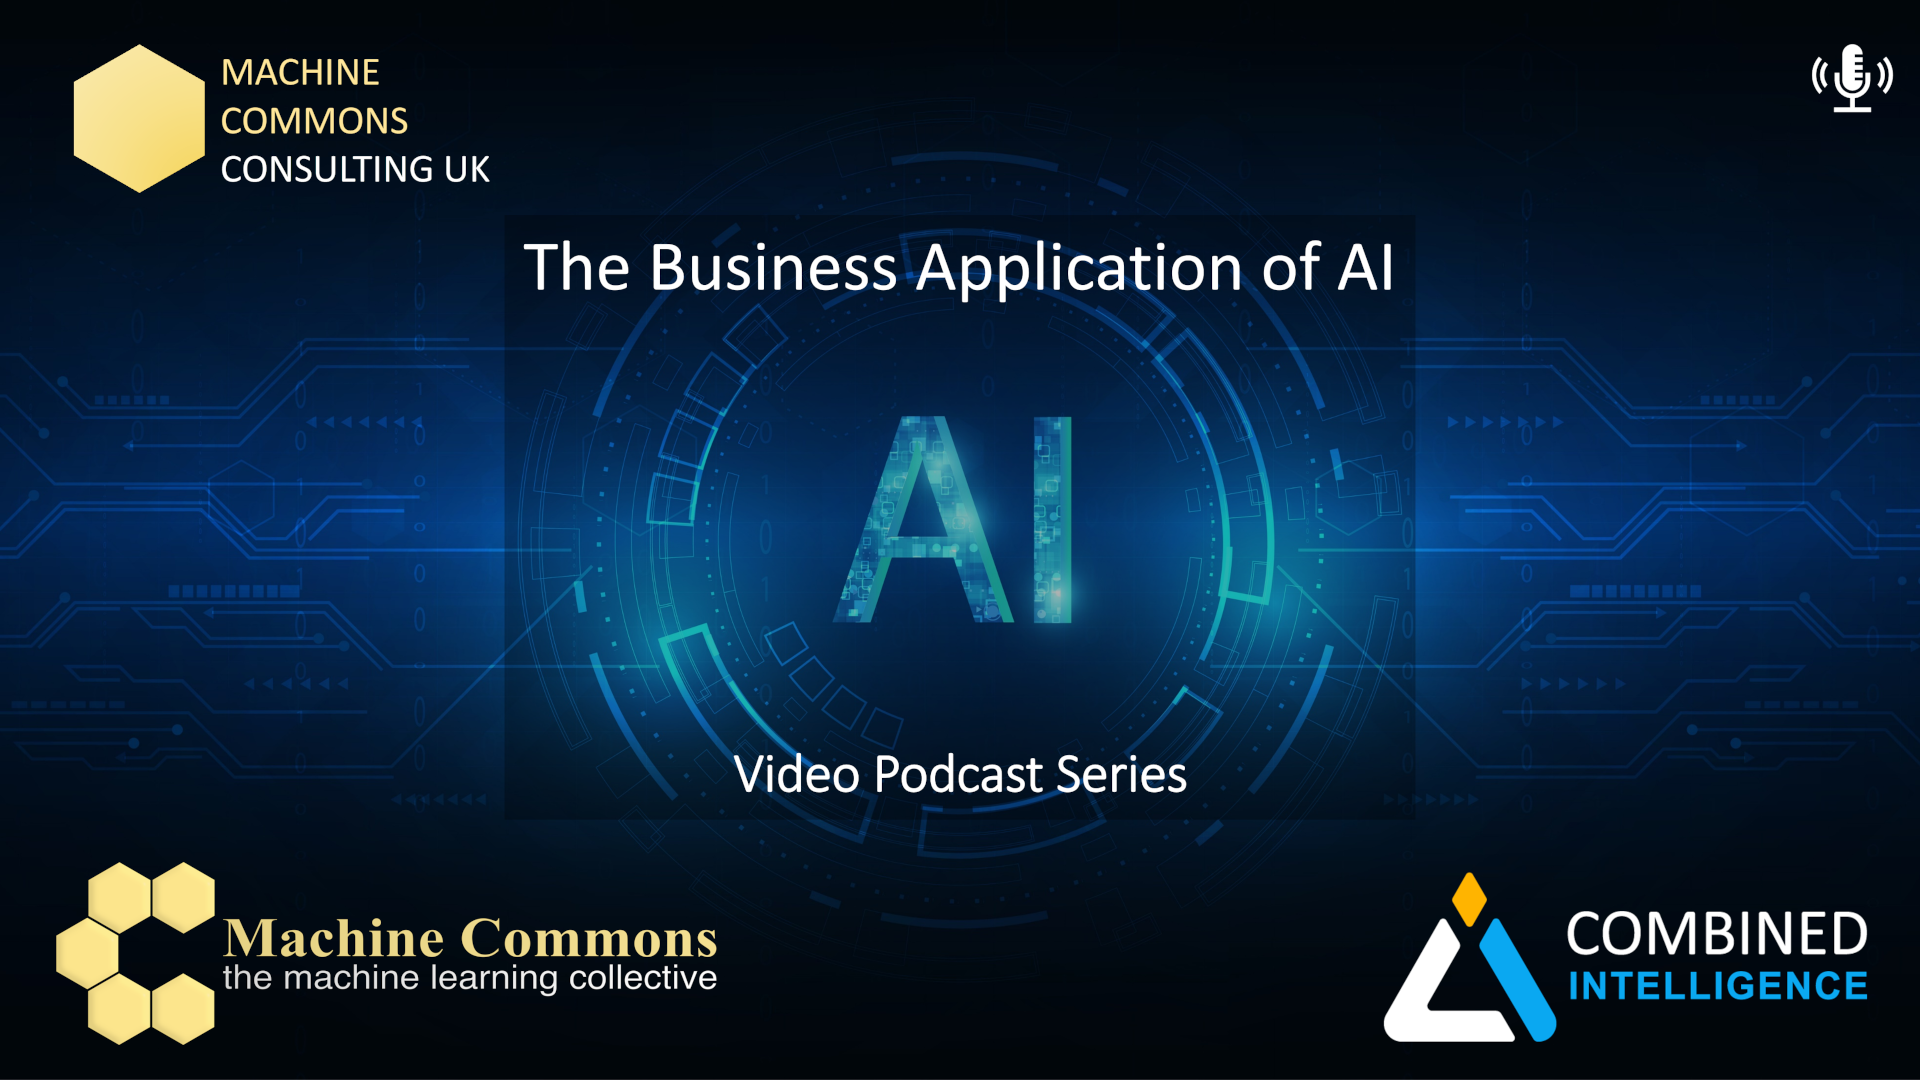 The Business Application of AI – Video Podcast Series